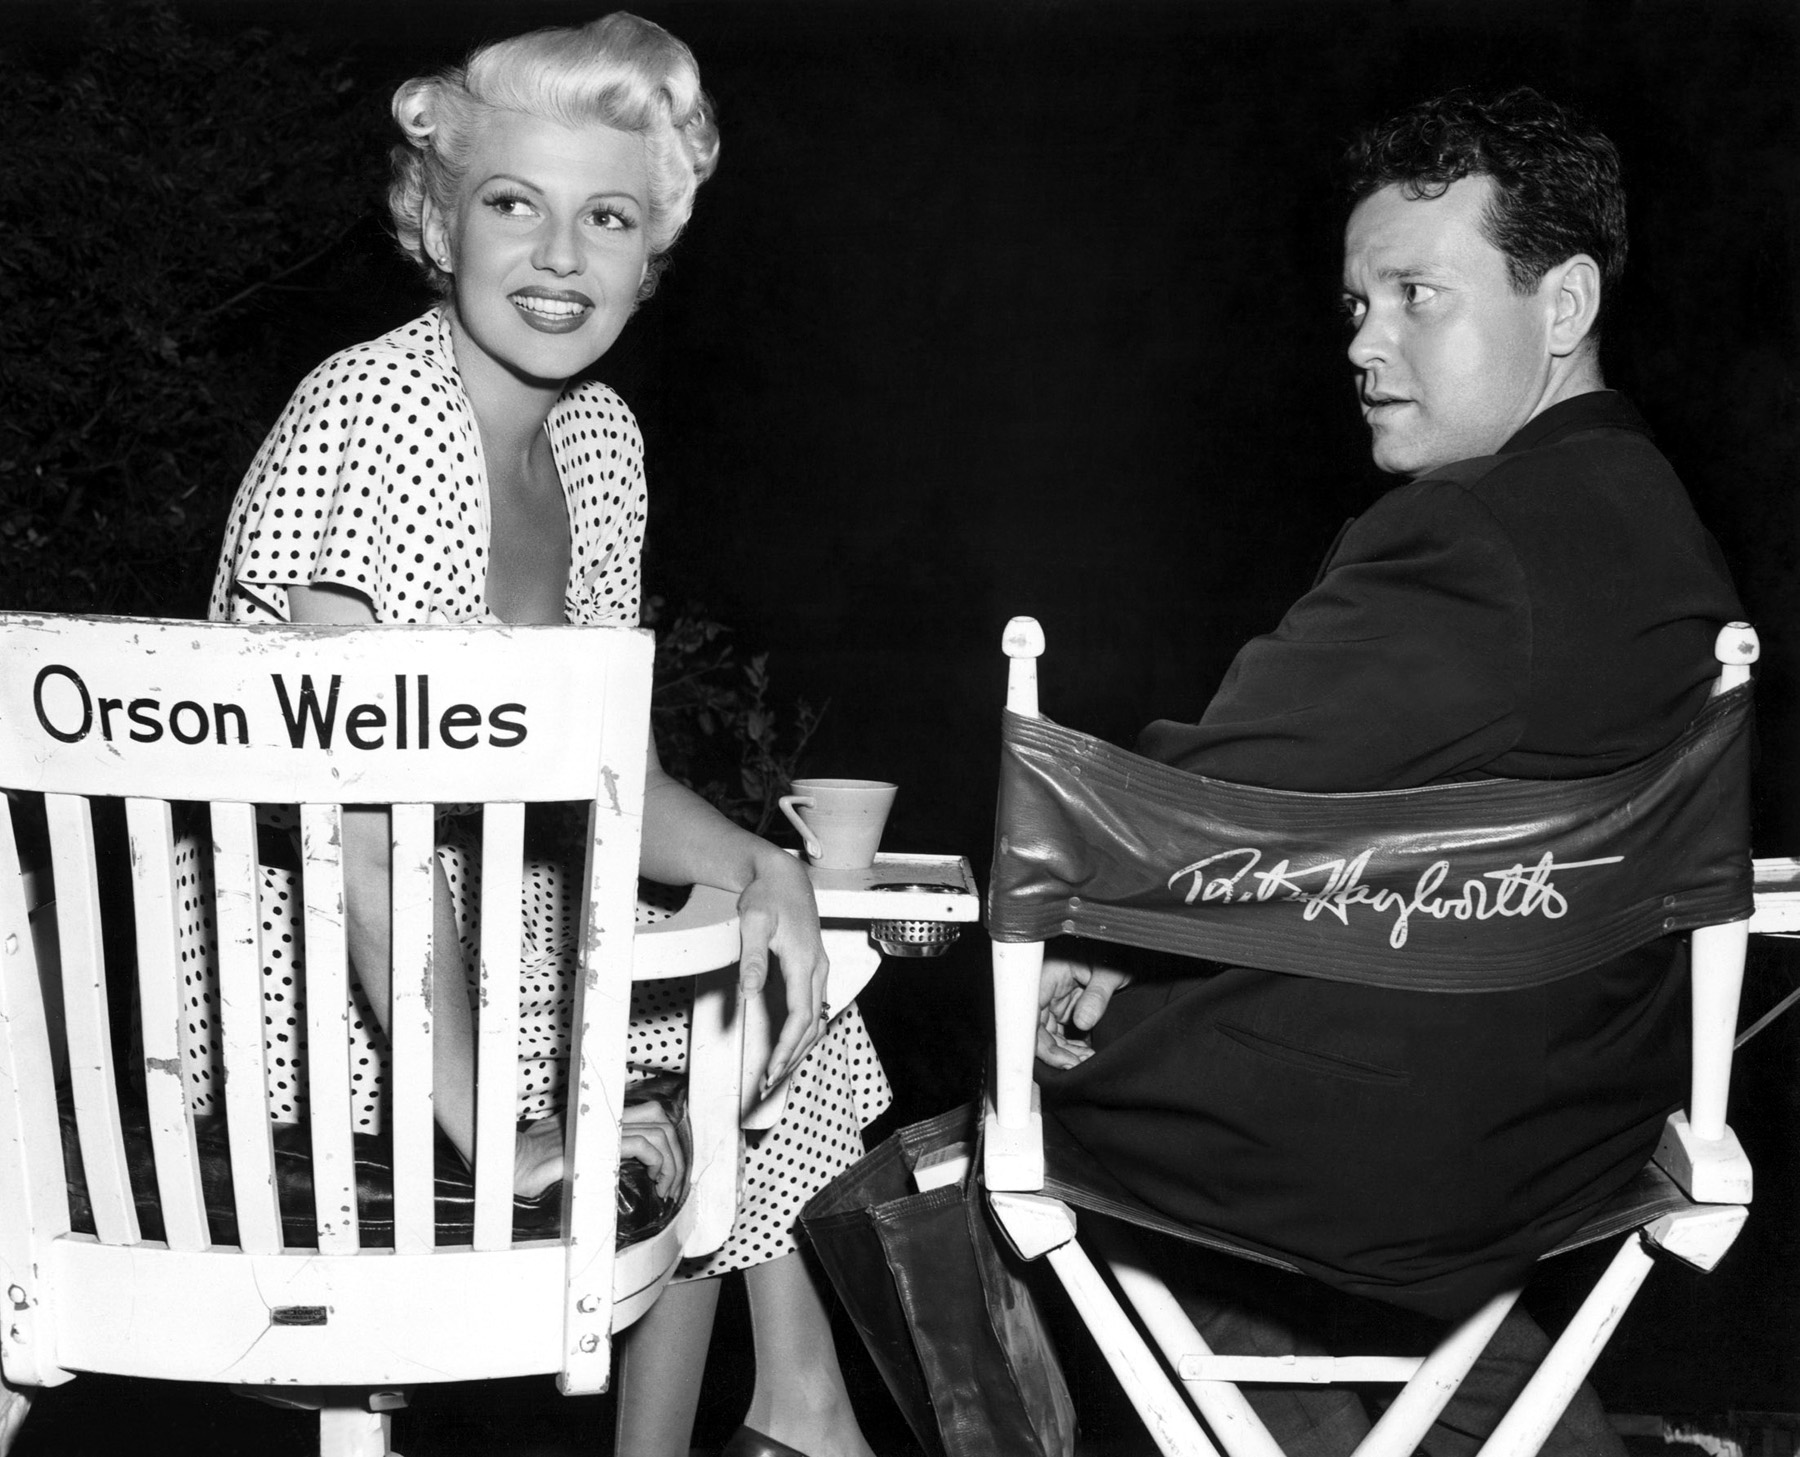 1947: Orson Welles and Rita Hayworth, his wife at the time, costarred in Columbia Pictures' The Lady from Shanghai. Welles was also the writer and director of the film.